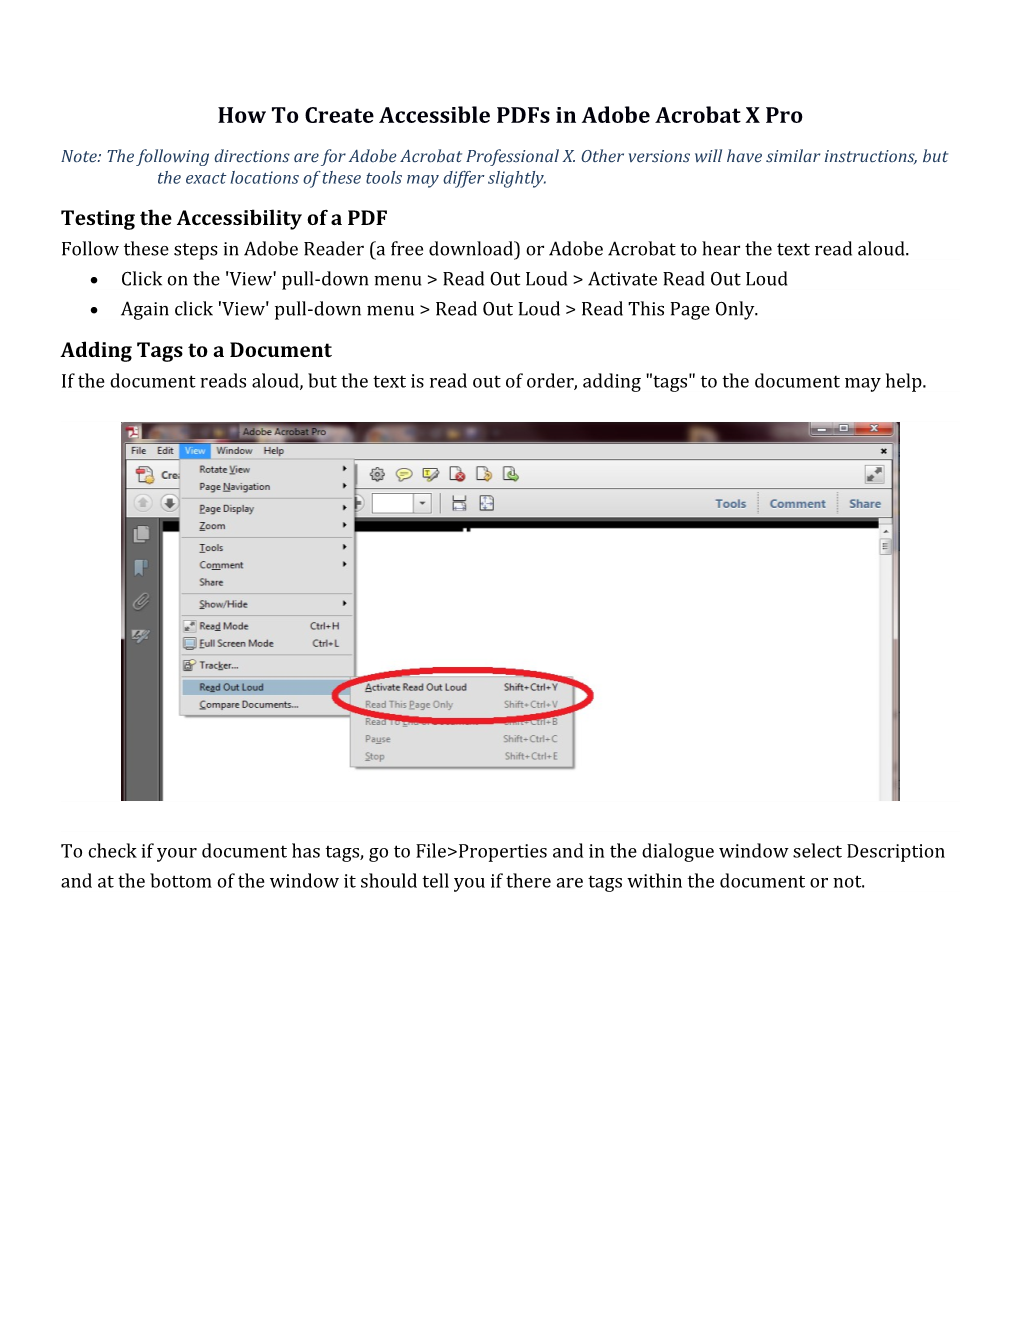 How to Create Accessible Pdfs in Adobe Acrobat X Pro